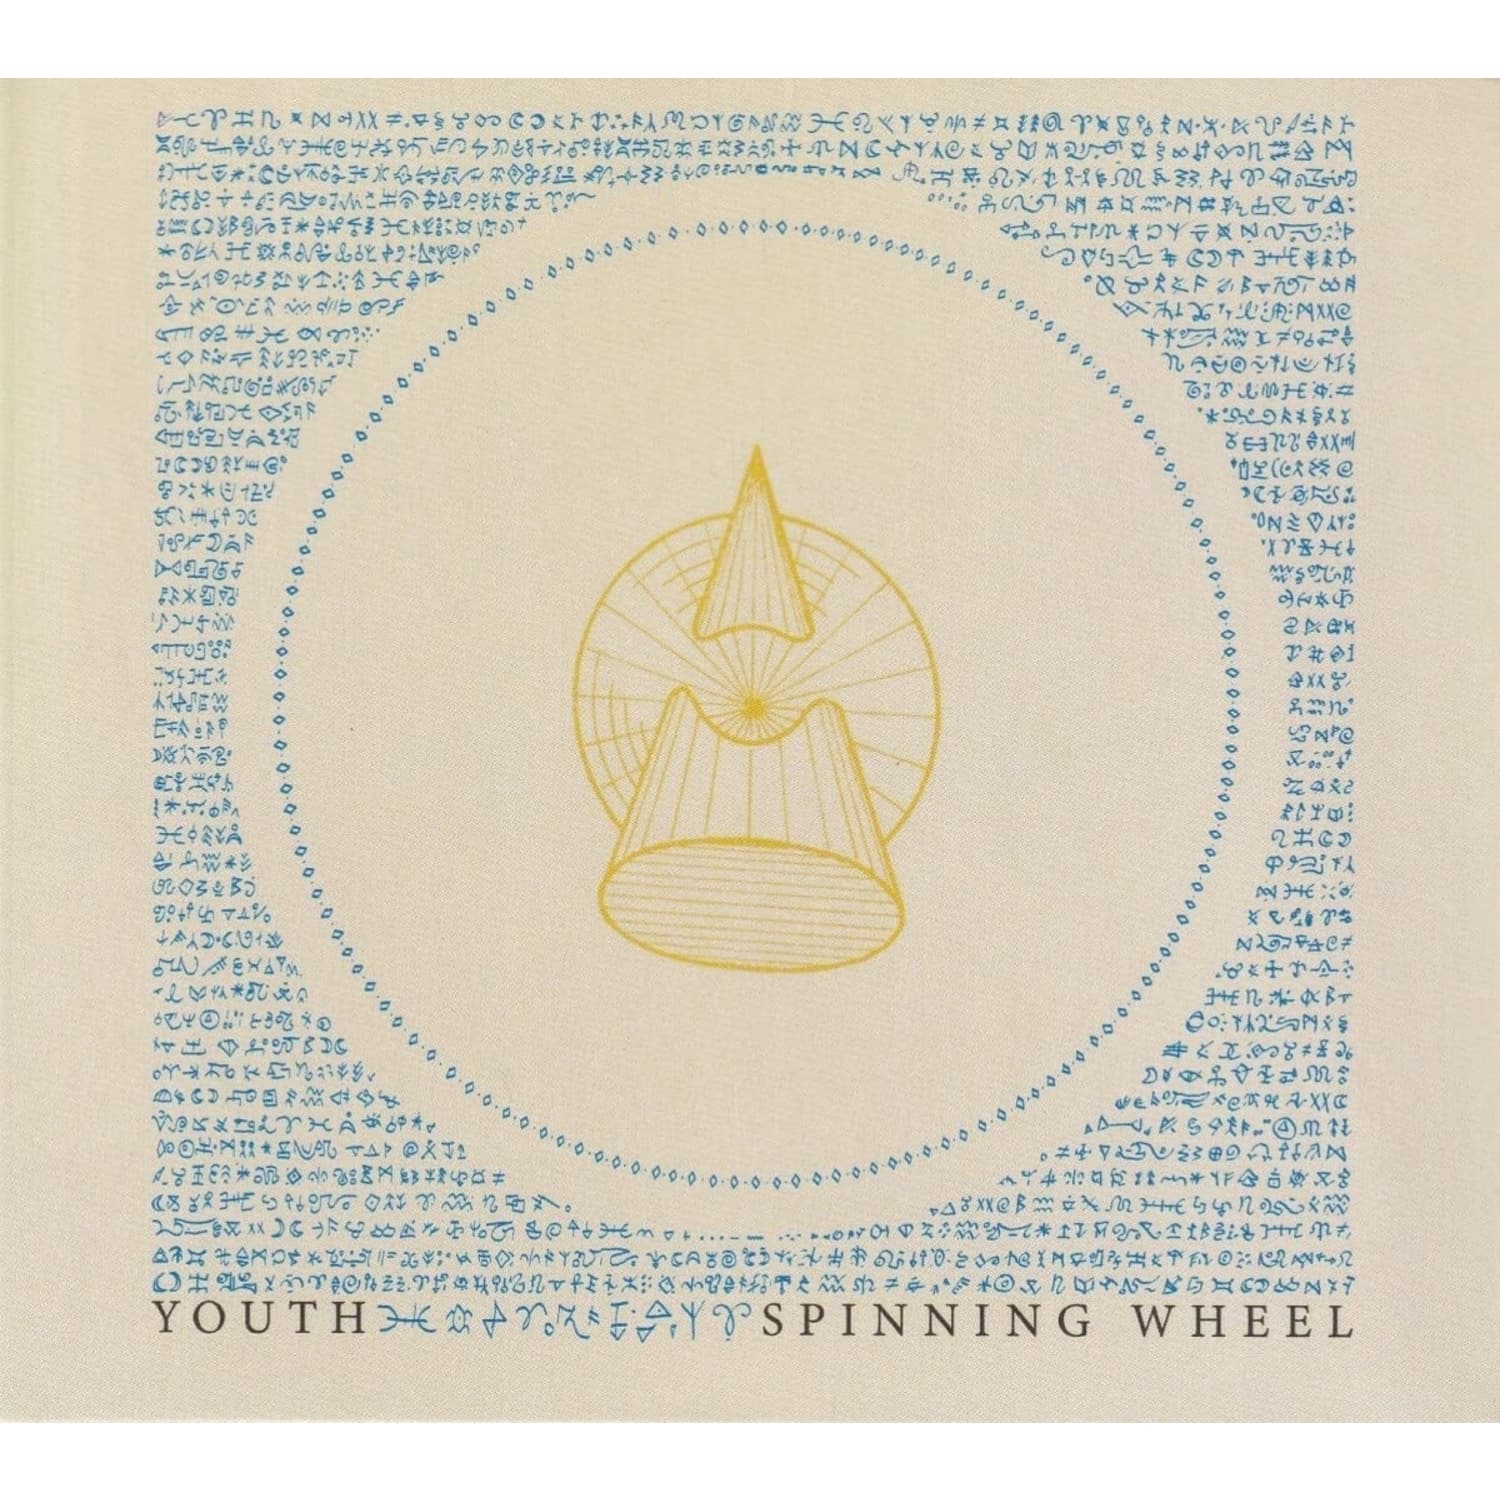 Youth - SPINNING WHEEL 